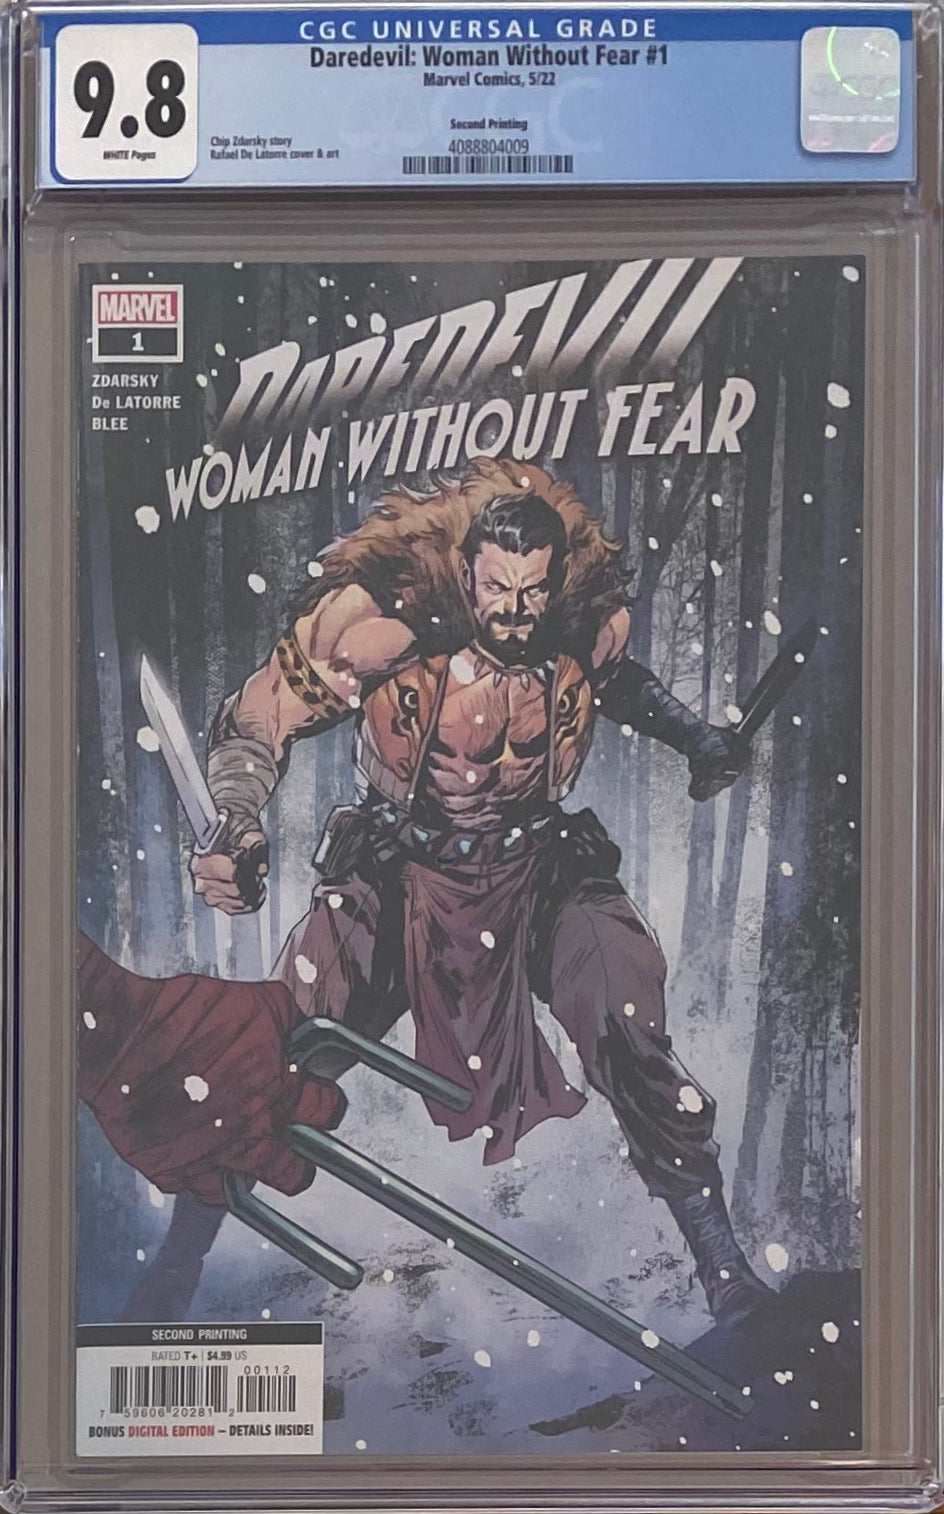 Daredevil: Woman Without Fear #1 Second Printing CGC 9.8